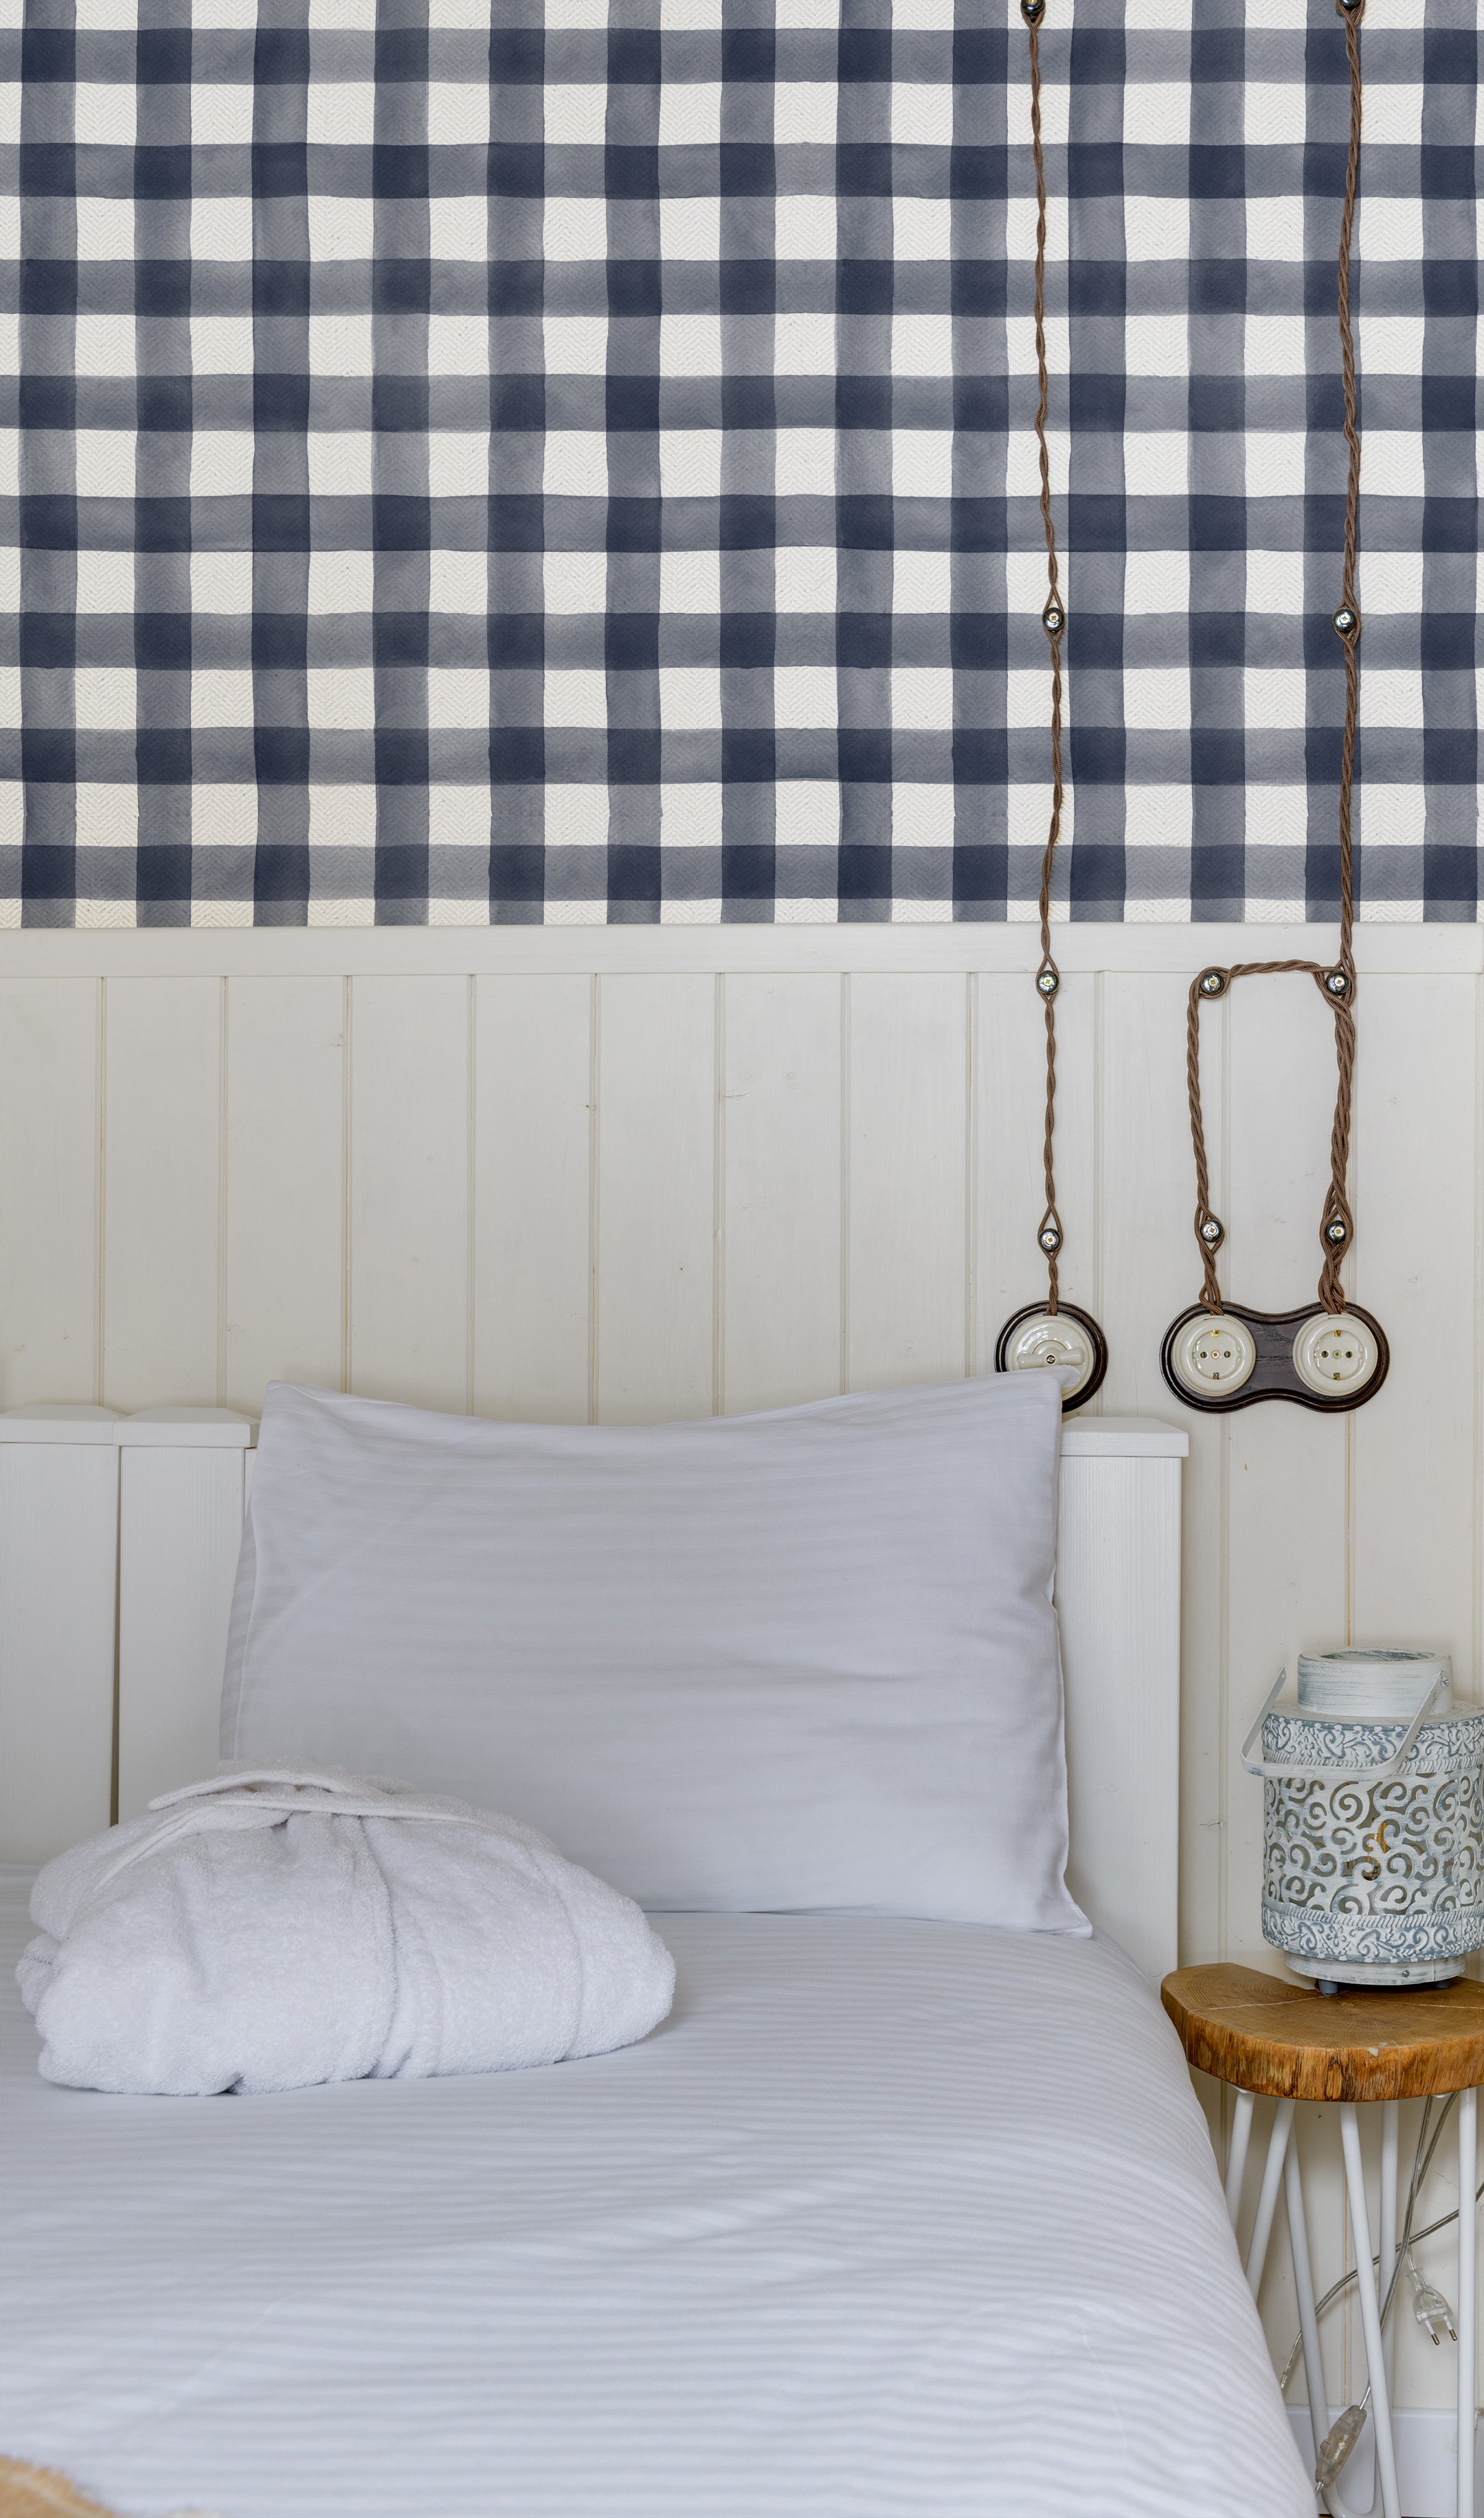 A cozy bedroom setting with a wall covered in navy blue and white buffalo check wallpaper. The room features a single bed with white linens, a white pillow, and a vintage-style round wall clock hanging on the ropes above the bed, creating a classic, inviting look.